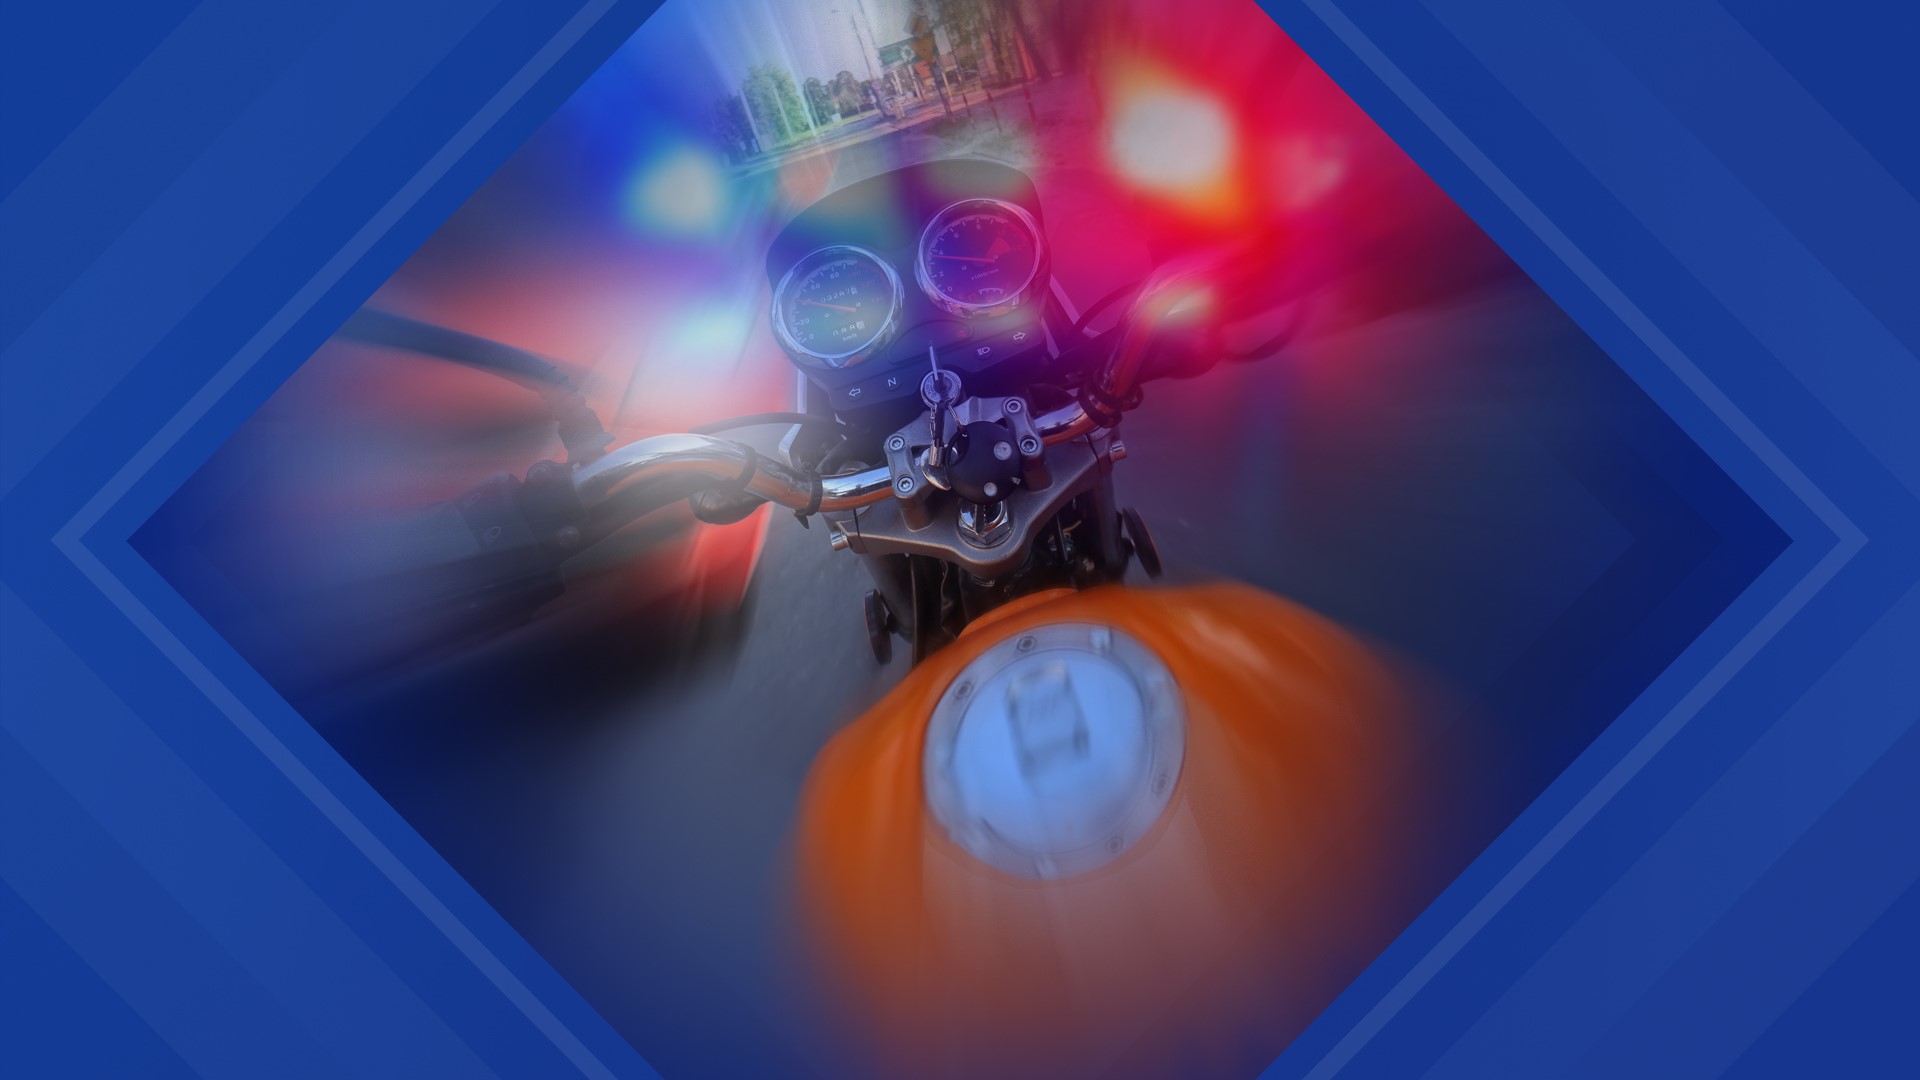 The man died and his passenger was hurt after a motorcycle crash in Tioga County.